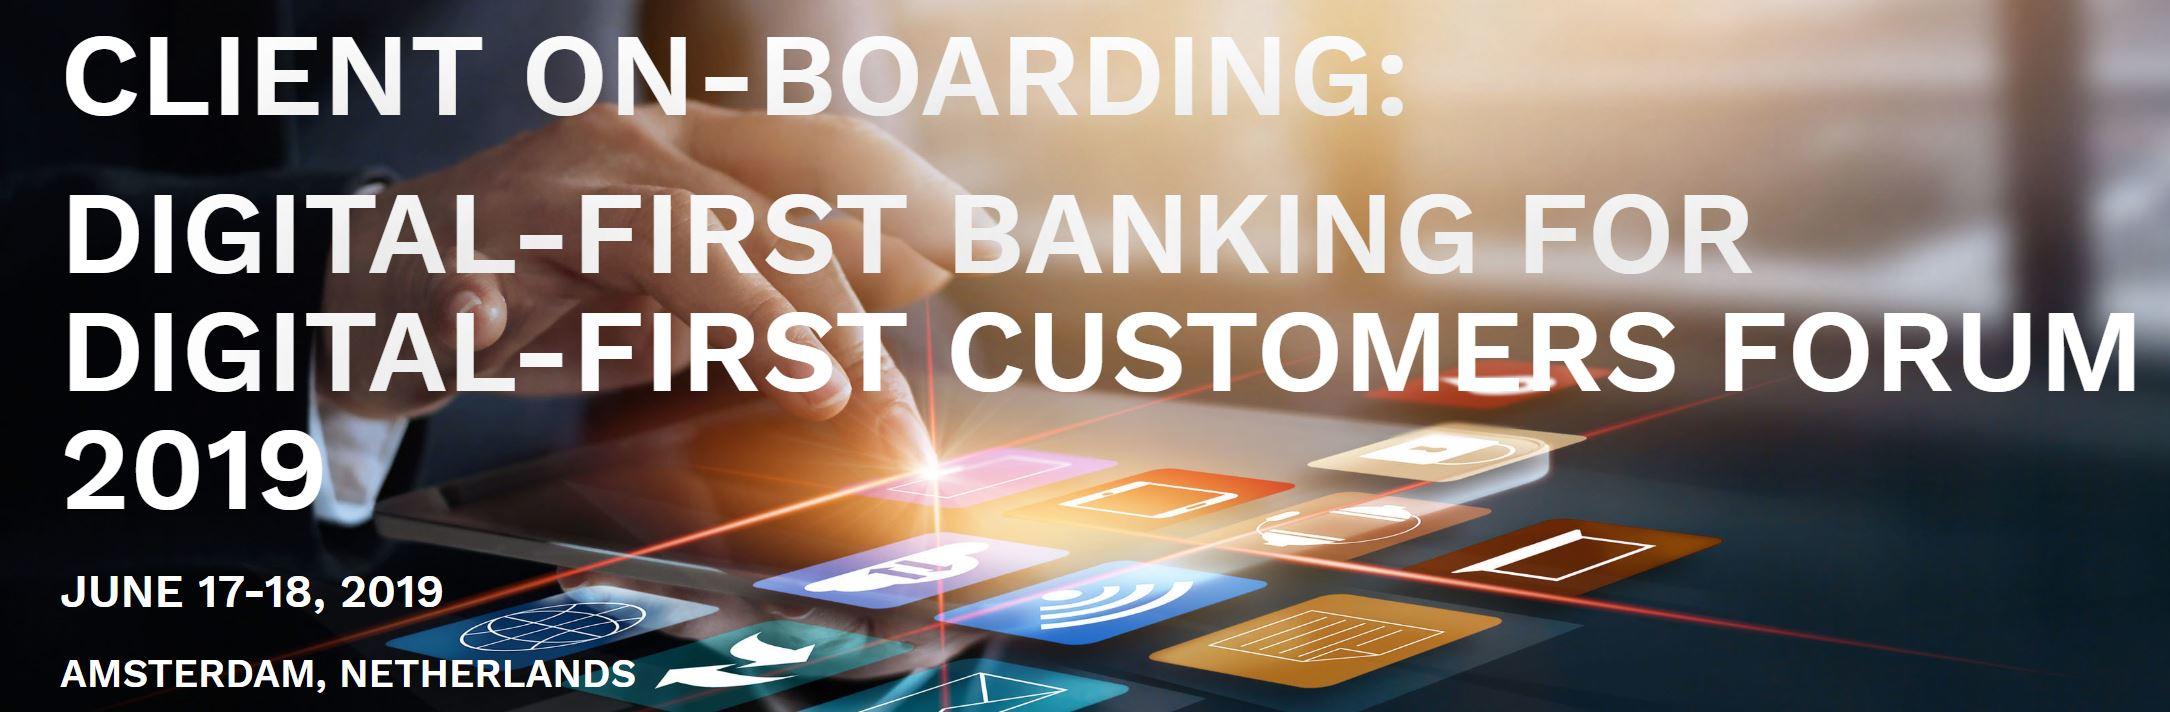  CLIENT ON-BOARDING: DIGITAL-FIRST BANKING FOR DIGITAL-FIRST CUSTOMERS FORUM 2019 ​